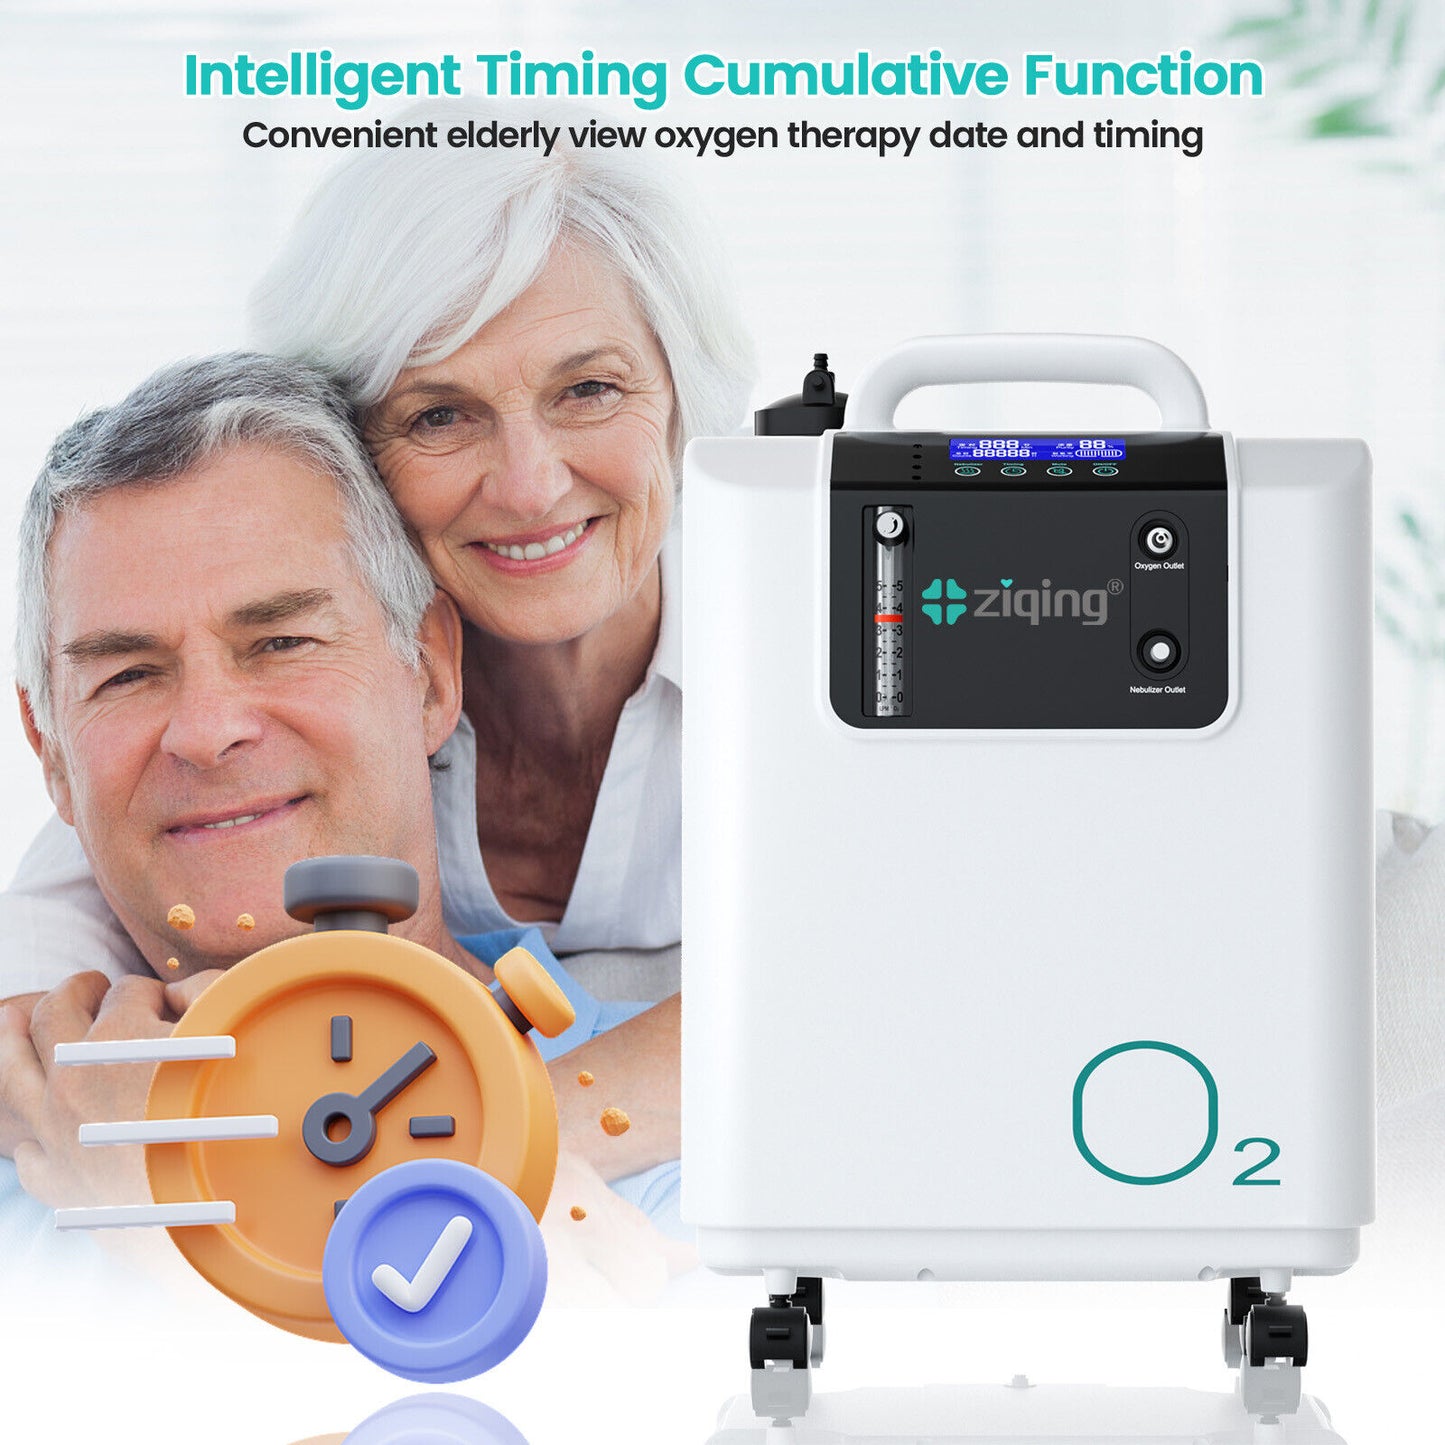 ziqing Oxygen Concentrator 3L Flow Household 90% High Concentration Oxygen Generator Low Noise Portable Oxygenerator